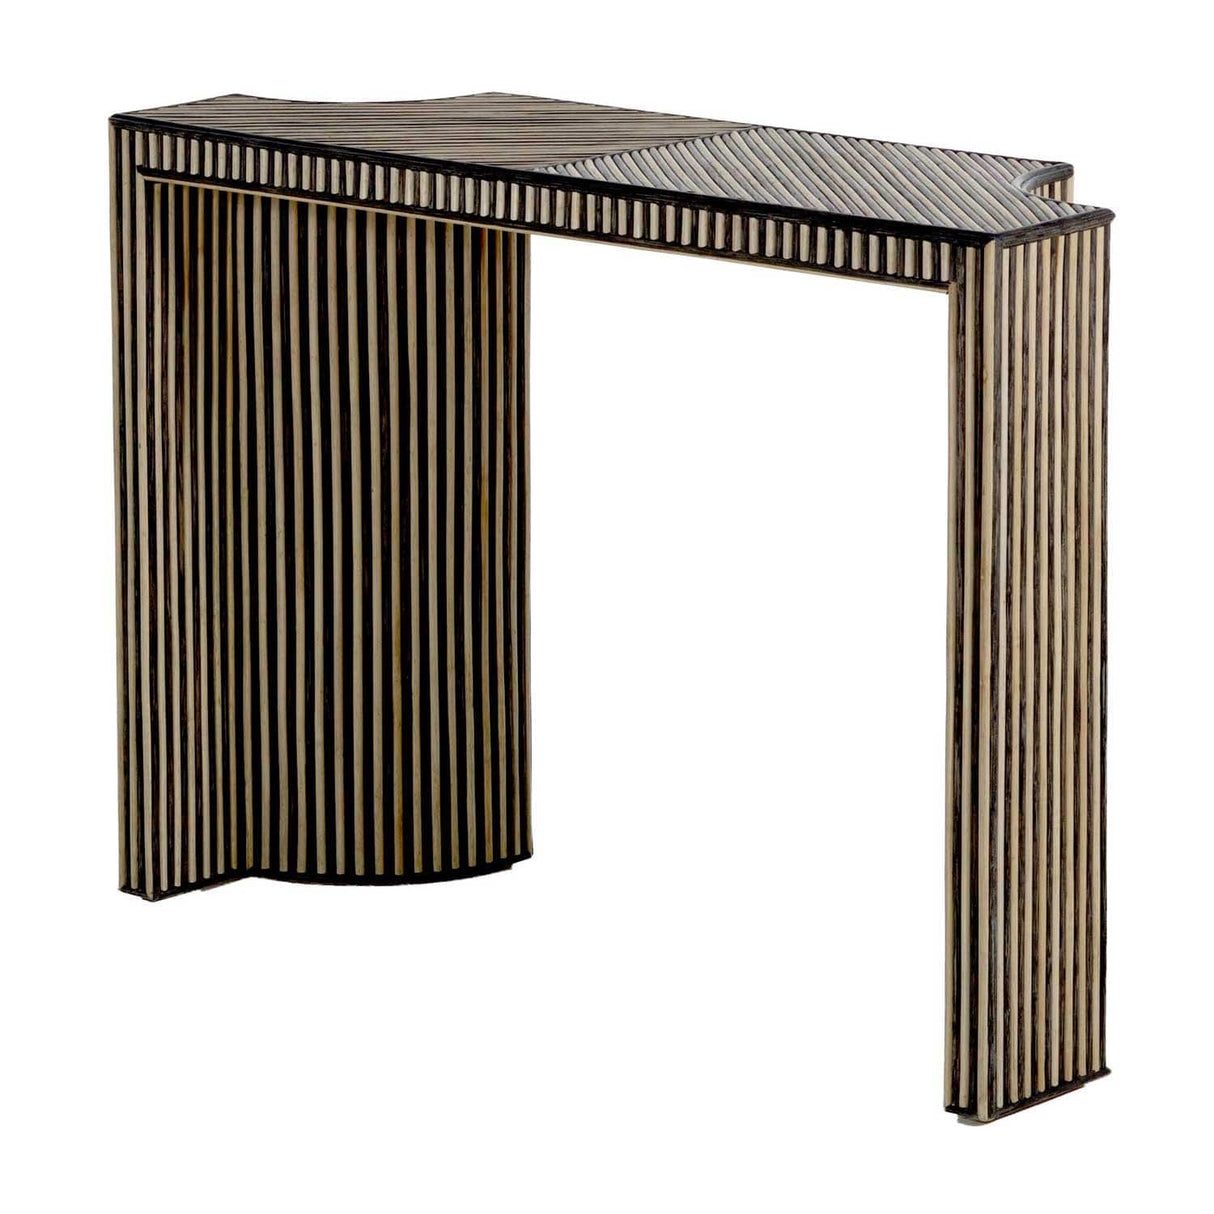 Gabby Trent Console Table Furniture gabby-SCH-160380 00842728116706